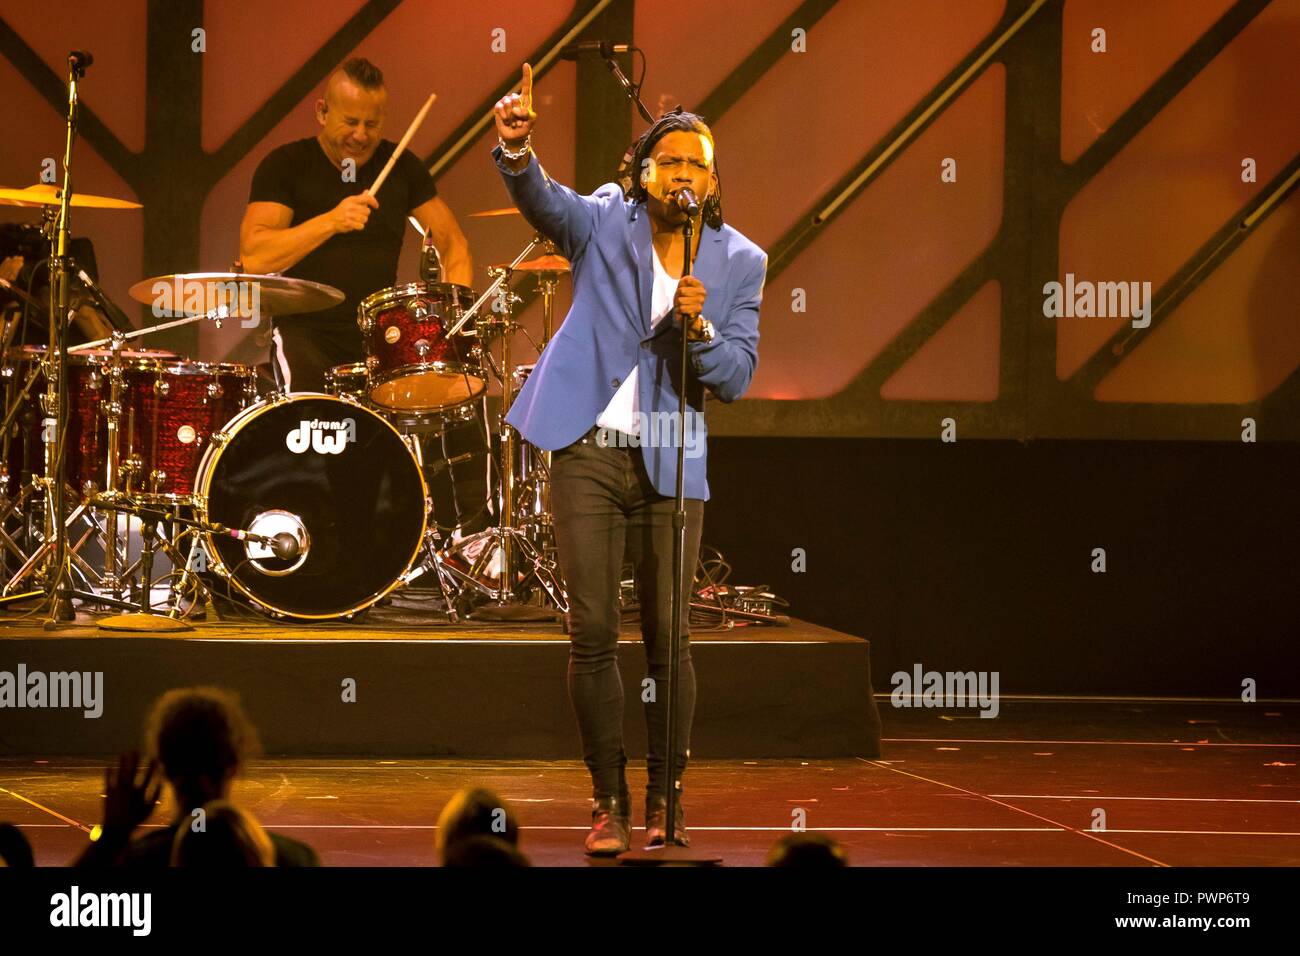 Nashville, Tennessee, USA. 16th Oct, 2018. Newsboys United performing at the 49th GMA Dove Awards were held at Lipscomb University's Allen Arena in Nashville. Michael Tait and longtime members Duncan Phillips, Jeff Frankenstein and Jody Davis united with former drummer/lead vocalist Peter Furler and bassist Phil Joel. Credit: Jason Walle/ZUMA Wire/Alamy Live News Stock Photo